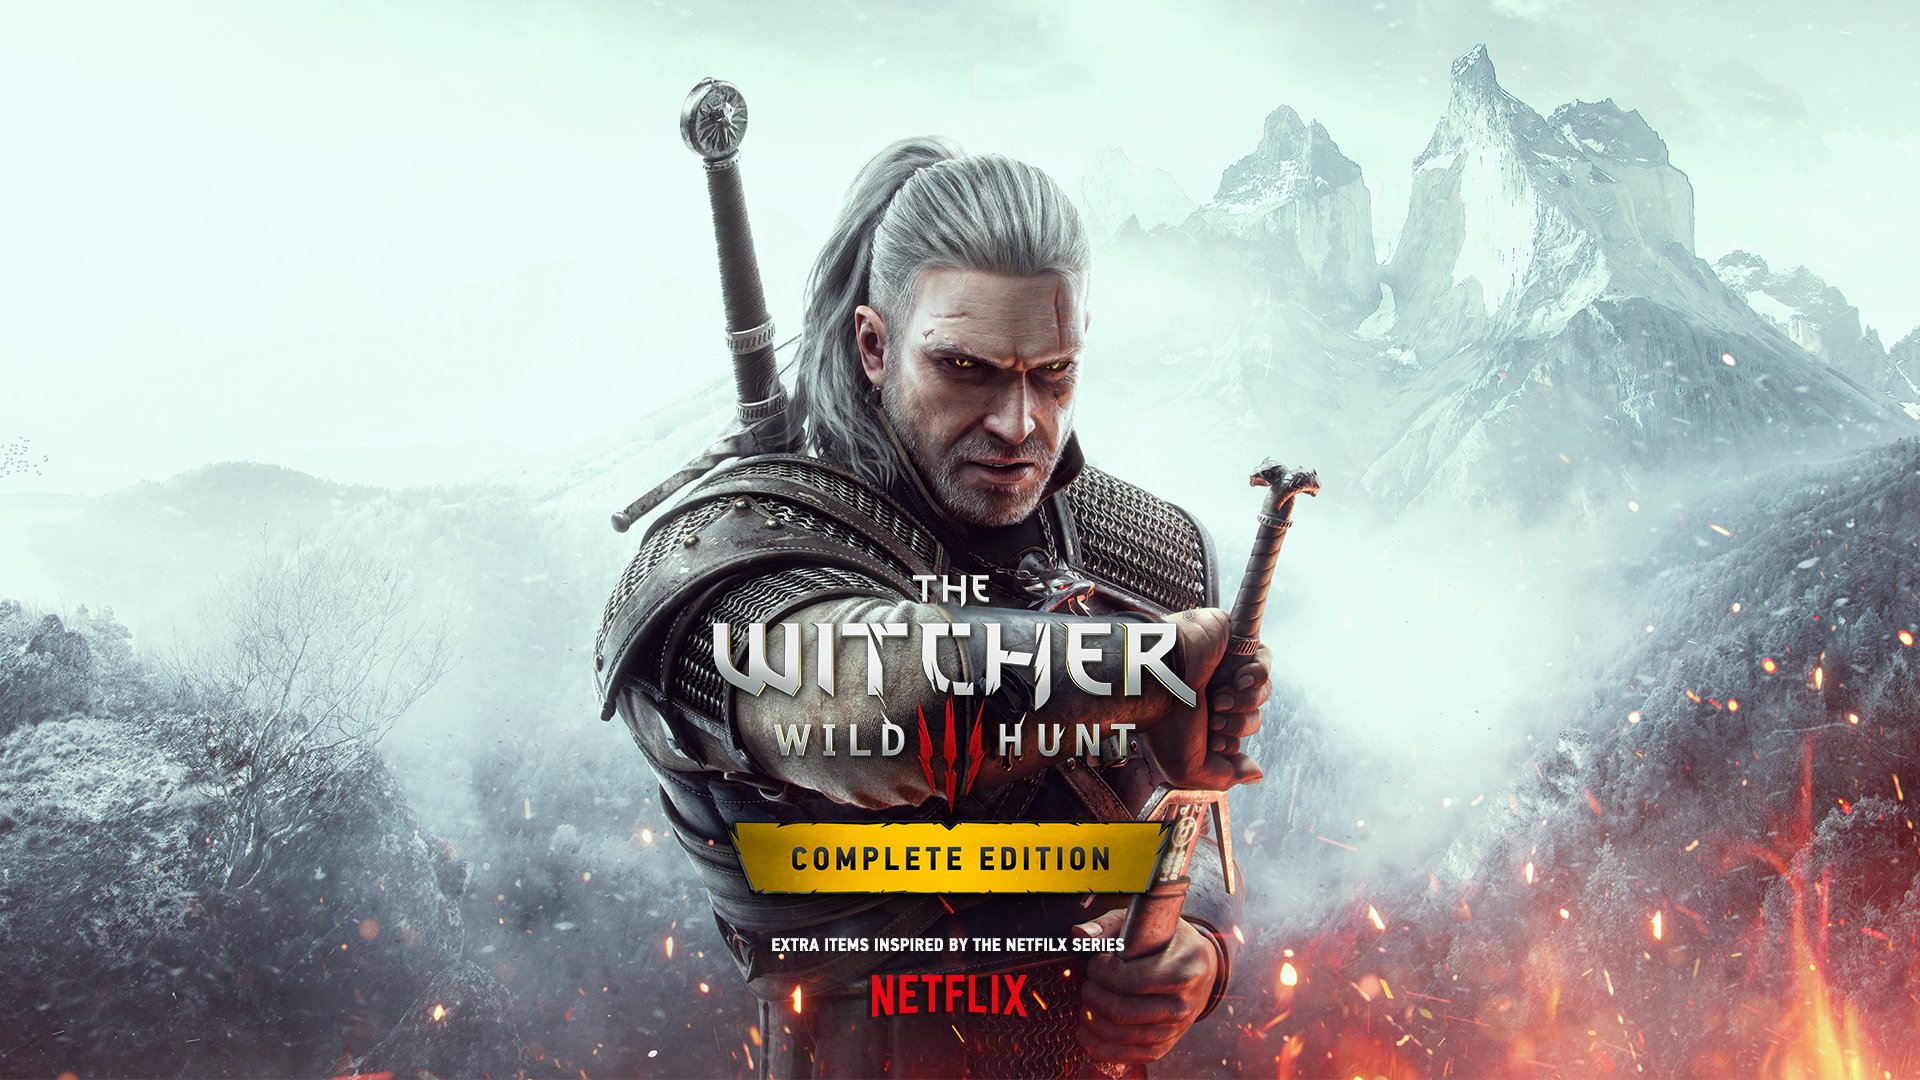 The Witcher 3 Atunse pipe 07 12 21 1